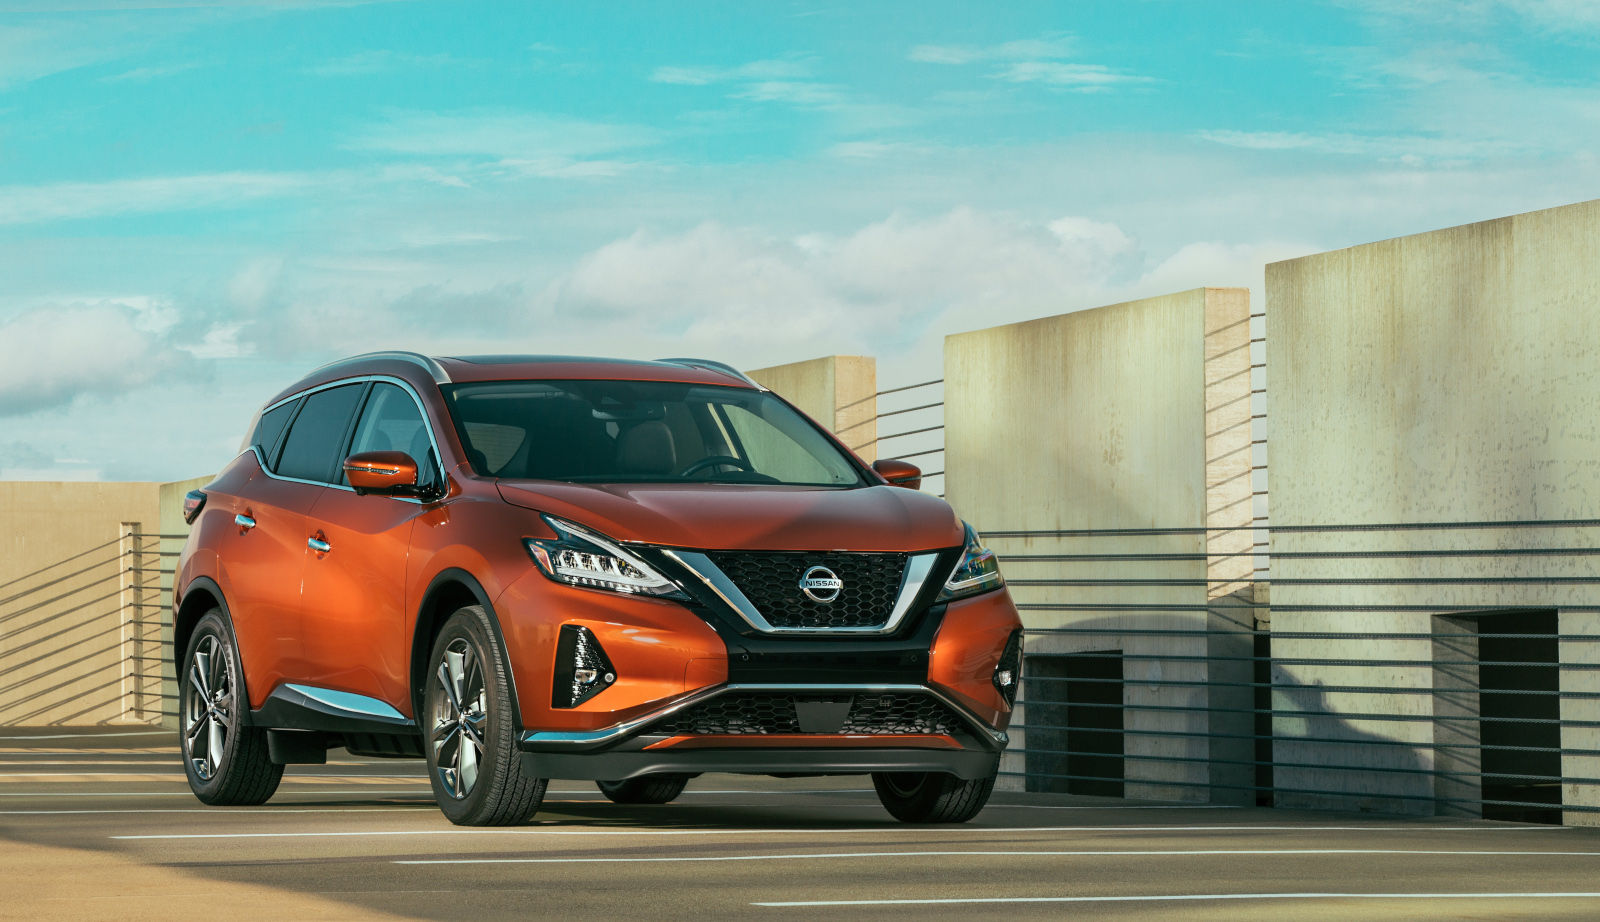 What You Should Know About the Nissan Certified Pre-Owned Program